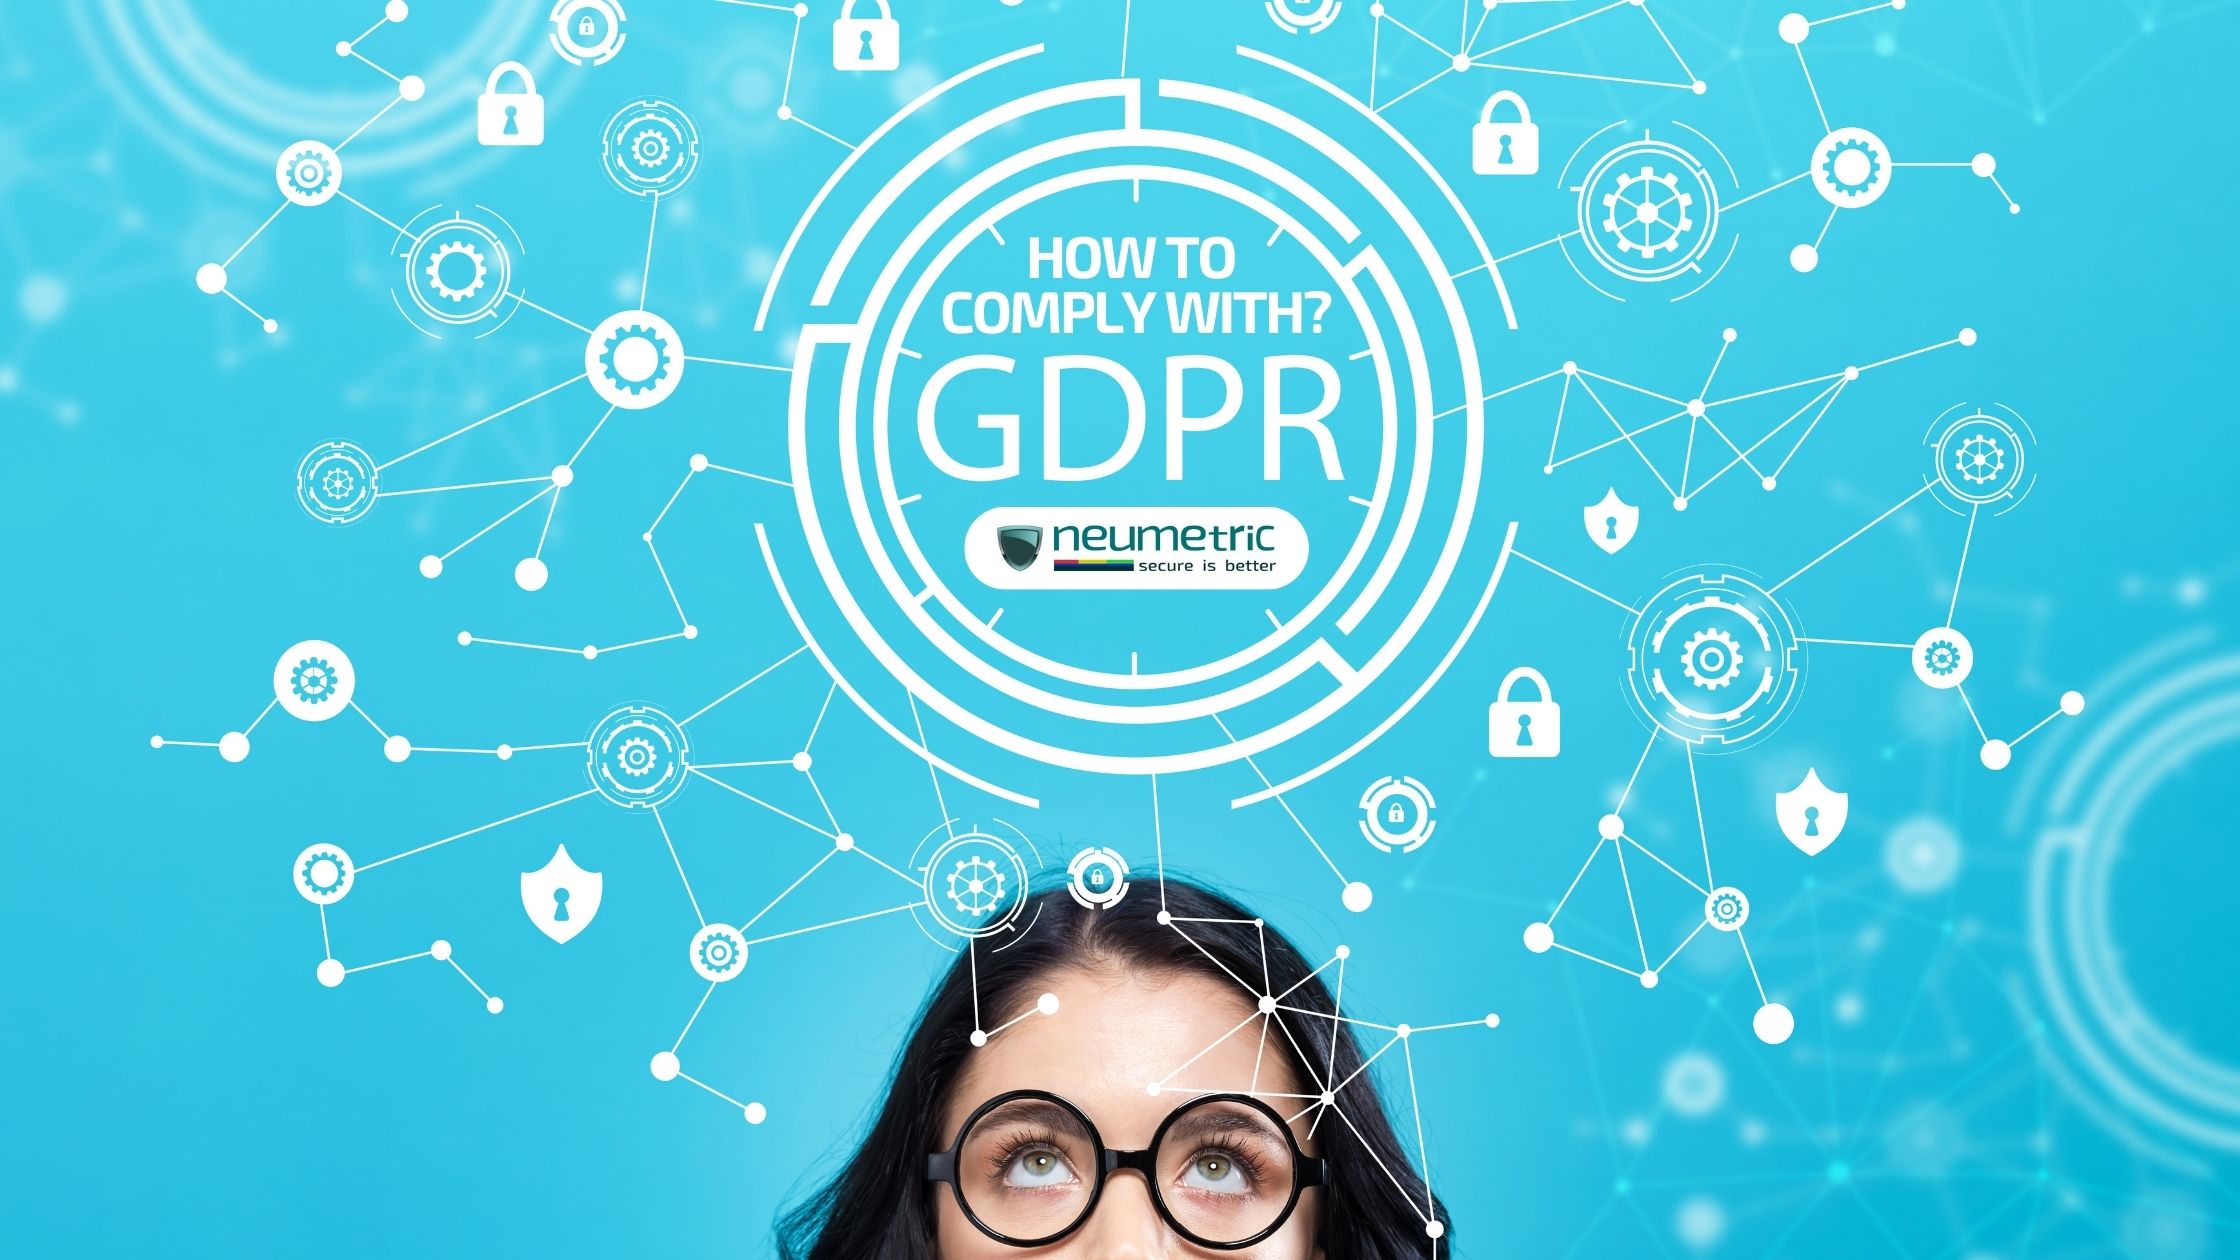 GDPR: How to comply with the Data Protection Law